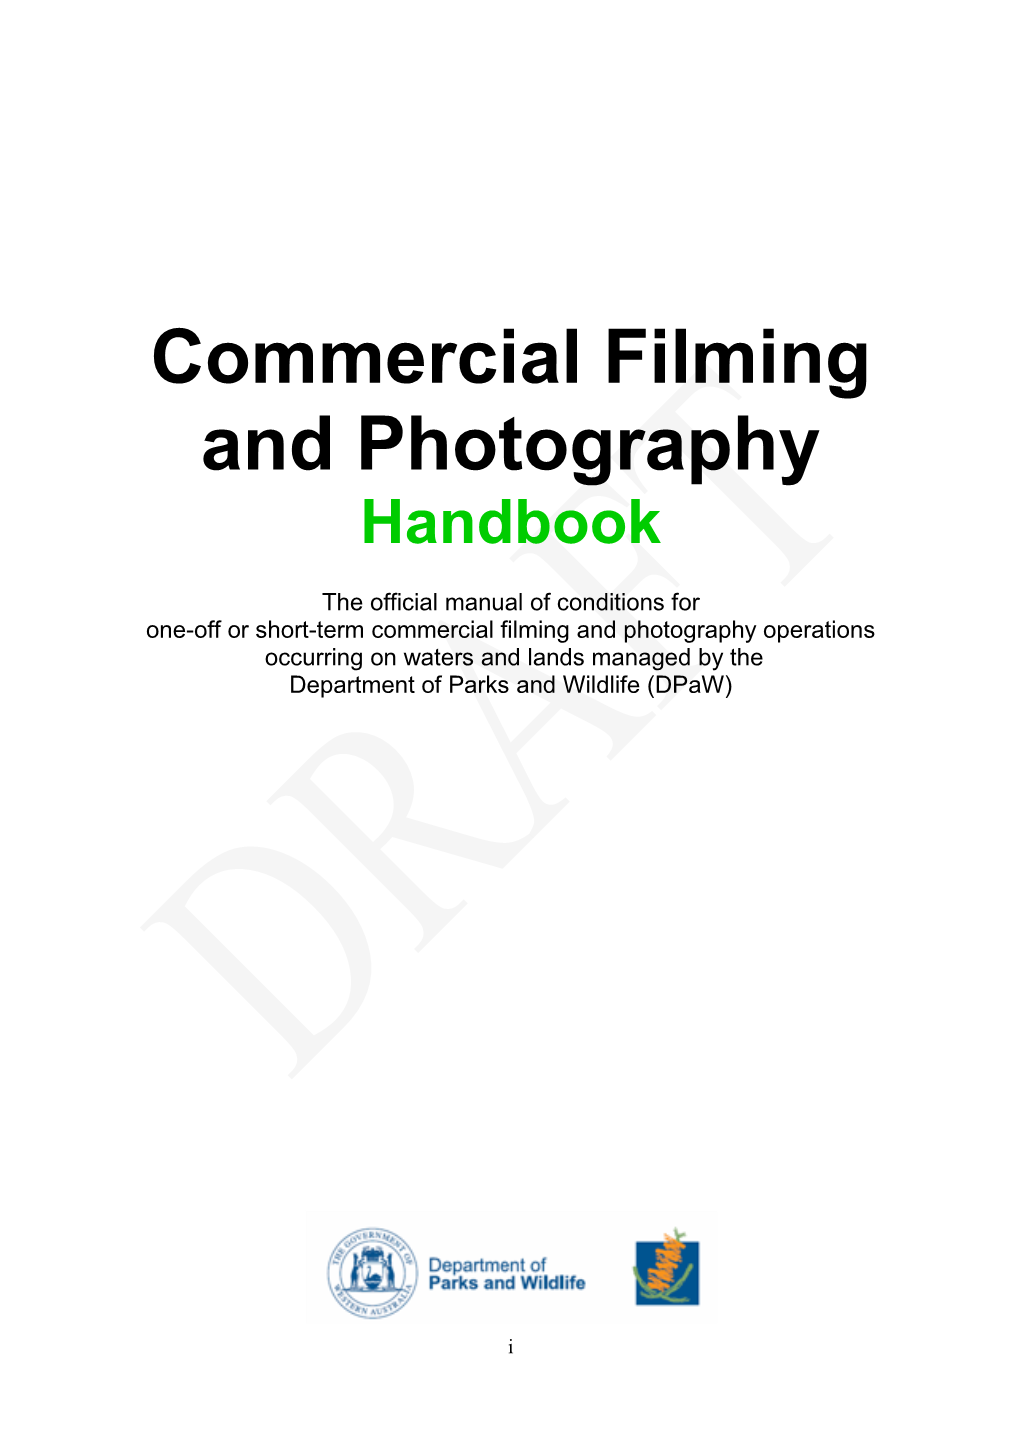 Commercial Filming and Photography Handbook